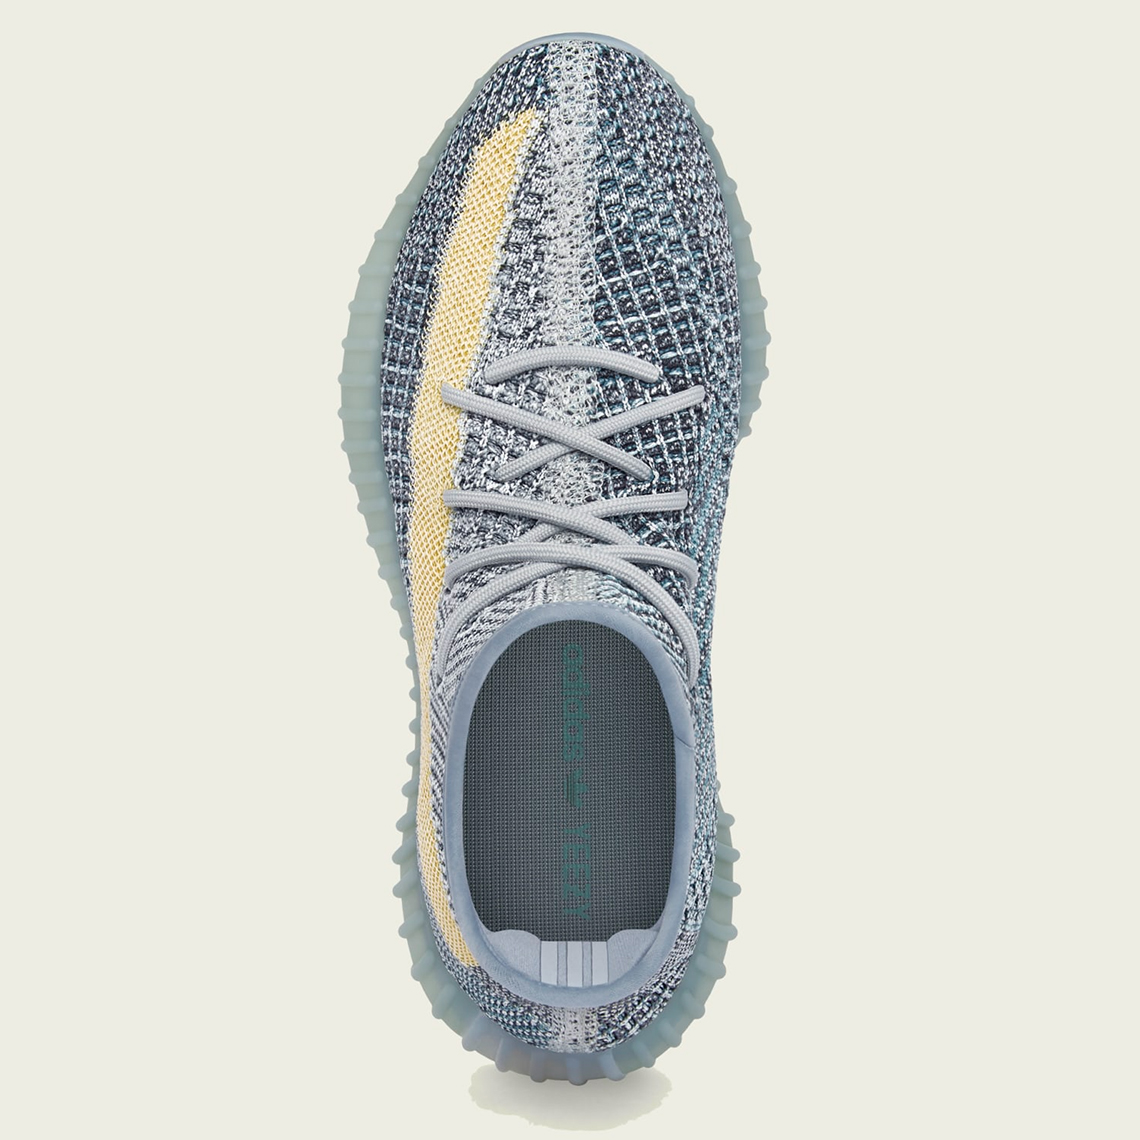 Adidas Yeezy Boost 350 V2 Ash Blue Release Date Gy7657 4